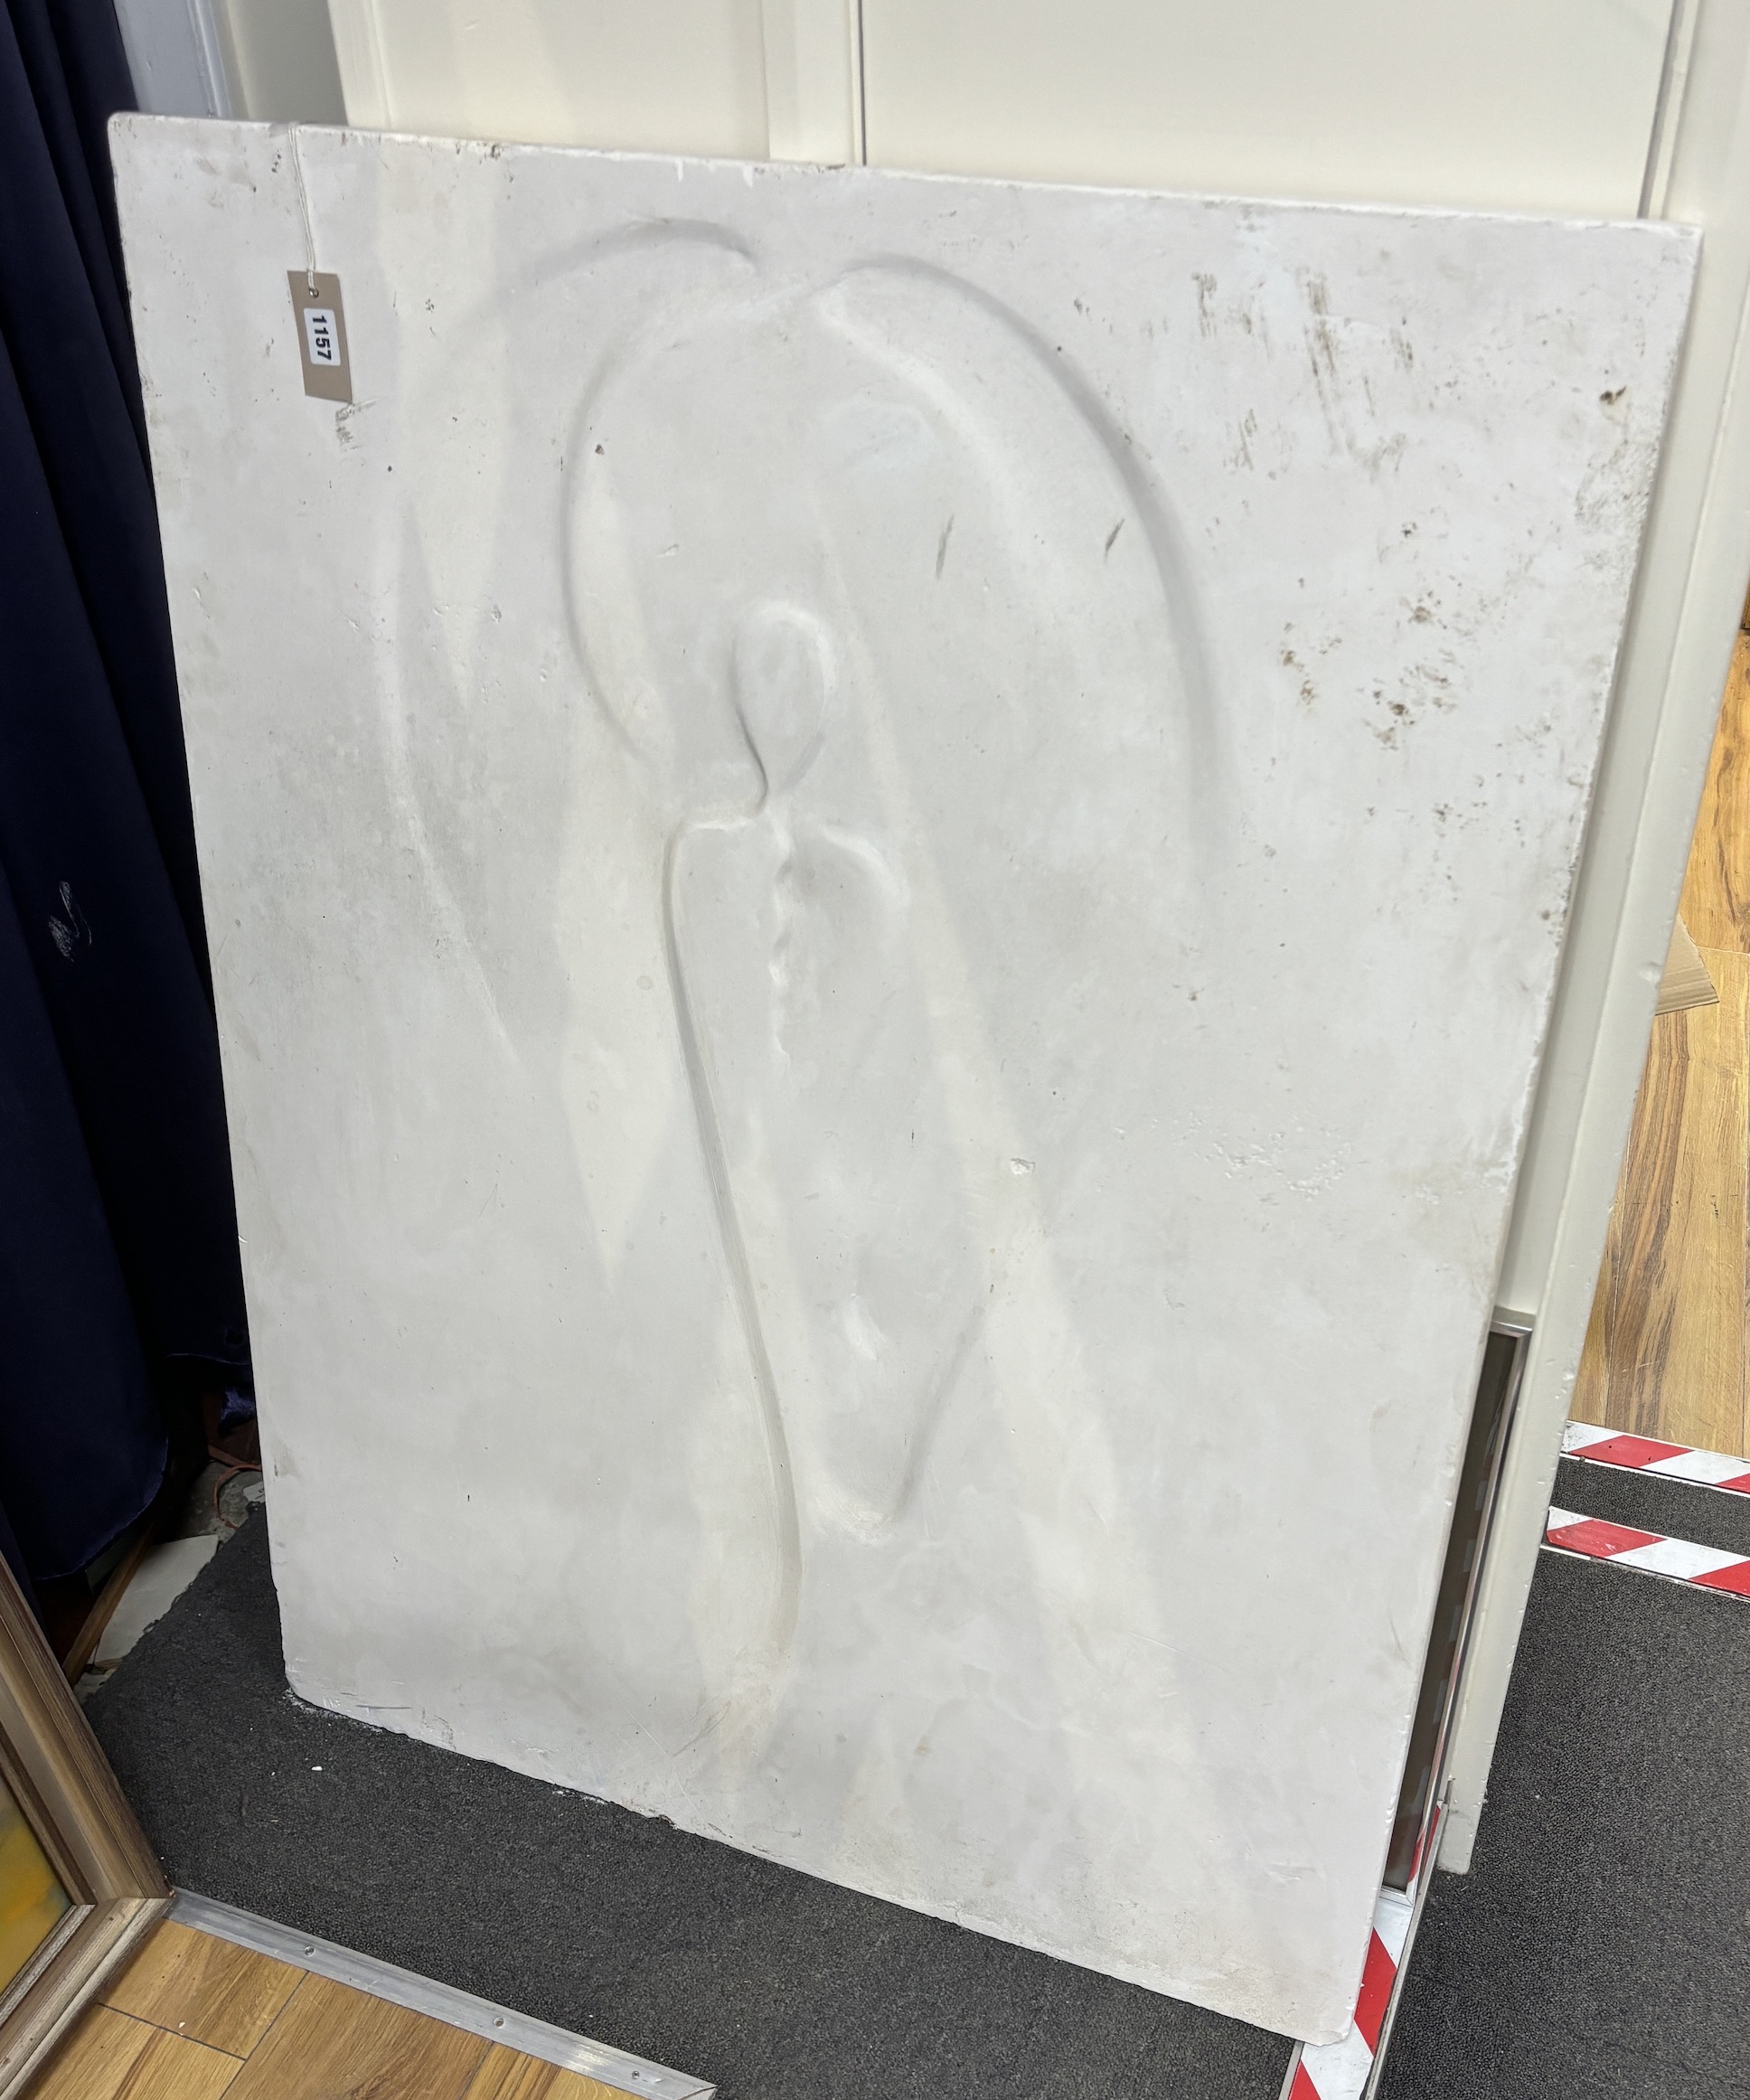 An abstract plaster panel, width 90cm, height 120cm, by repute Ginger Gilmour, ex wife of Dave Gilmour of Pink Floyd